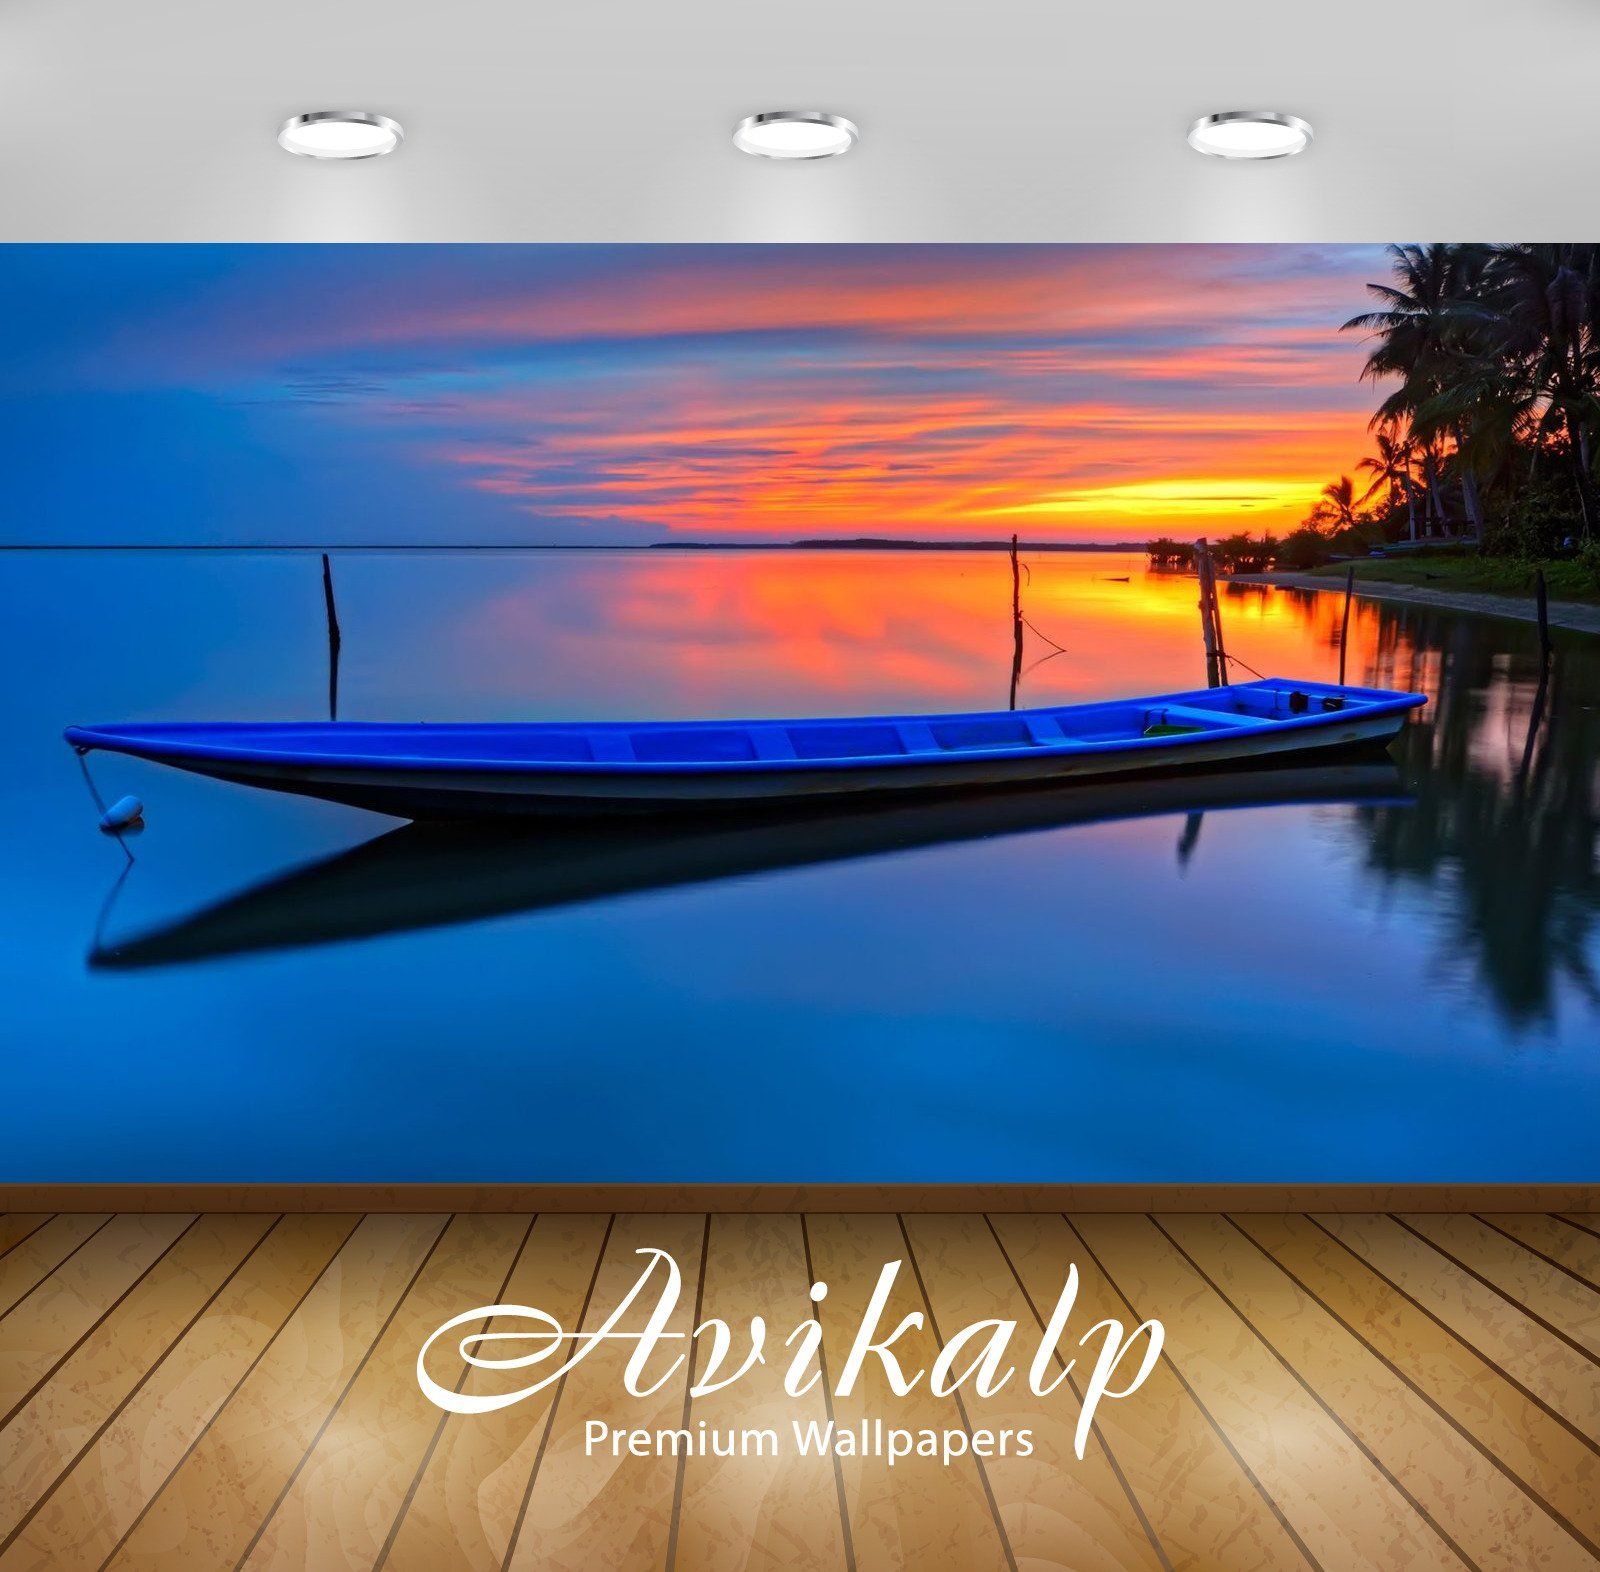 Avikalp Exclusive Awi3164 Tropical Sunset Boat Palms Trees Orange Sky Reflection In Water Full HD Wa DWal. Orange sky, 3D wallpaper for walls, Water reflections